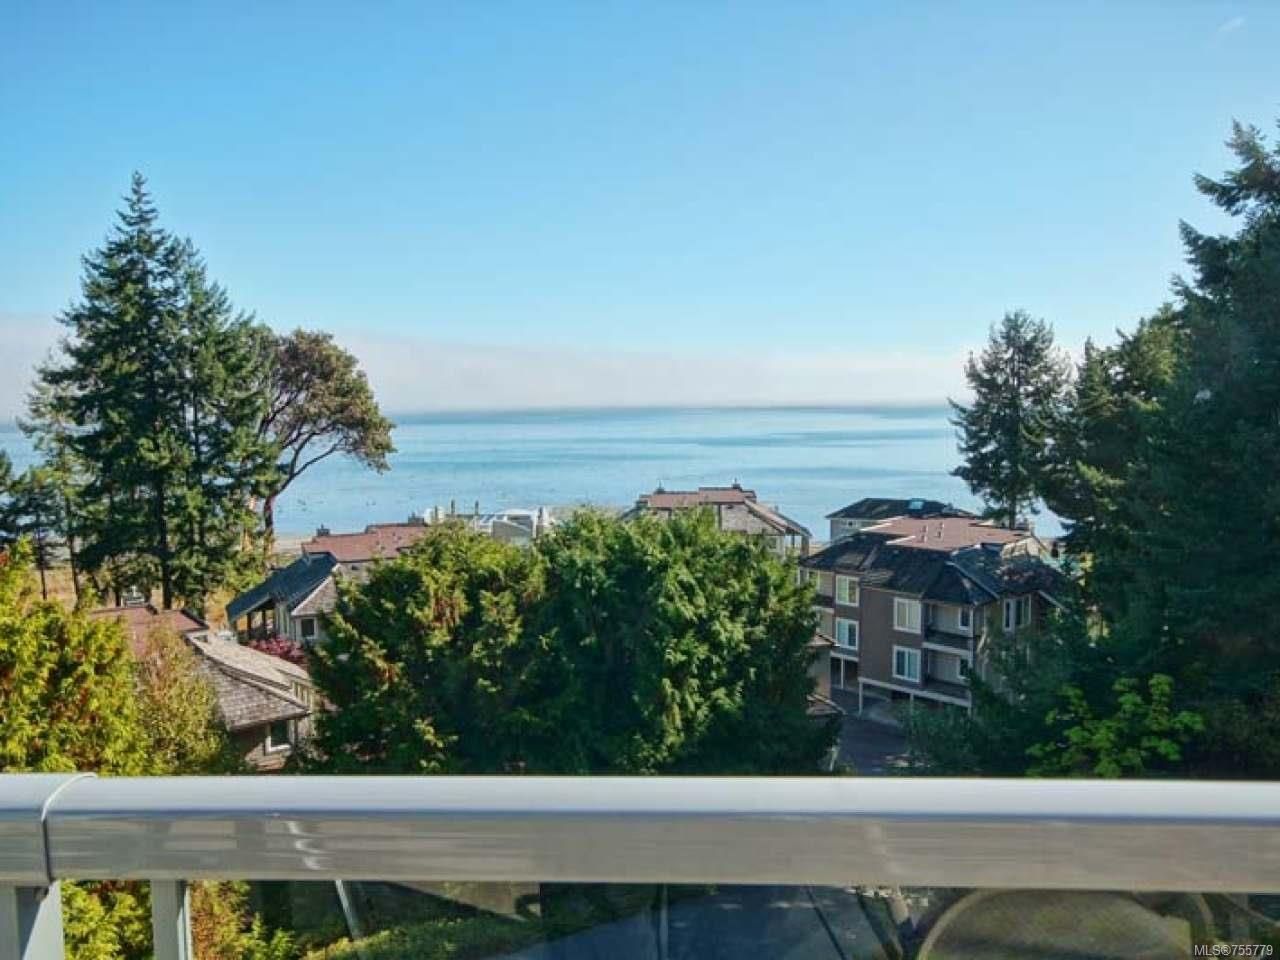 Main Photo: 26 1059 Tanglewood Pl in PARKSVILLE: PQ Parksville Row/Townhouse for sale (Parksville/Qualicum)  : MLS®# 755779